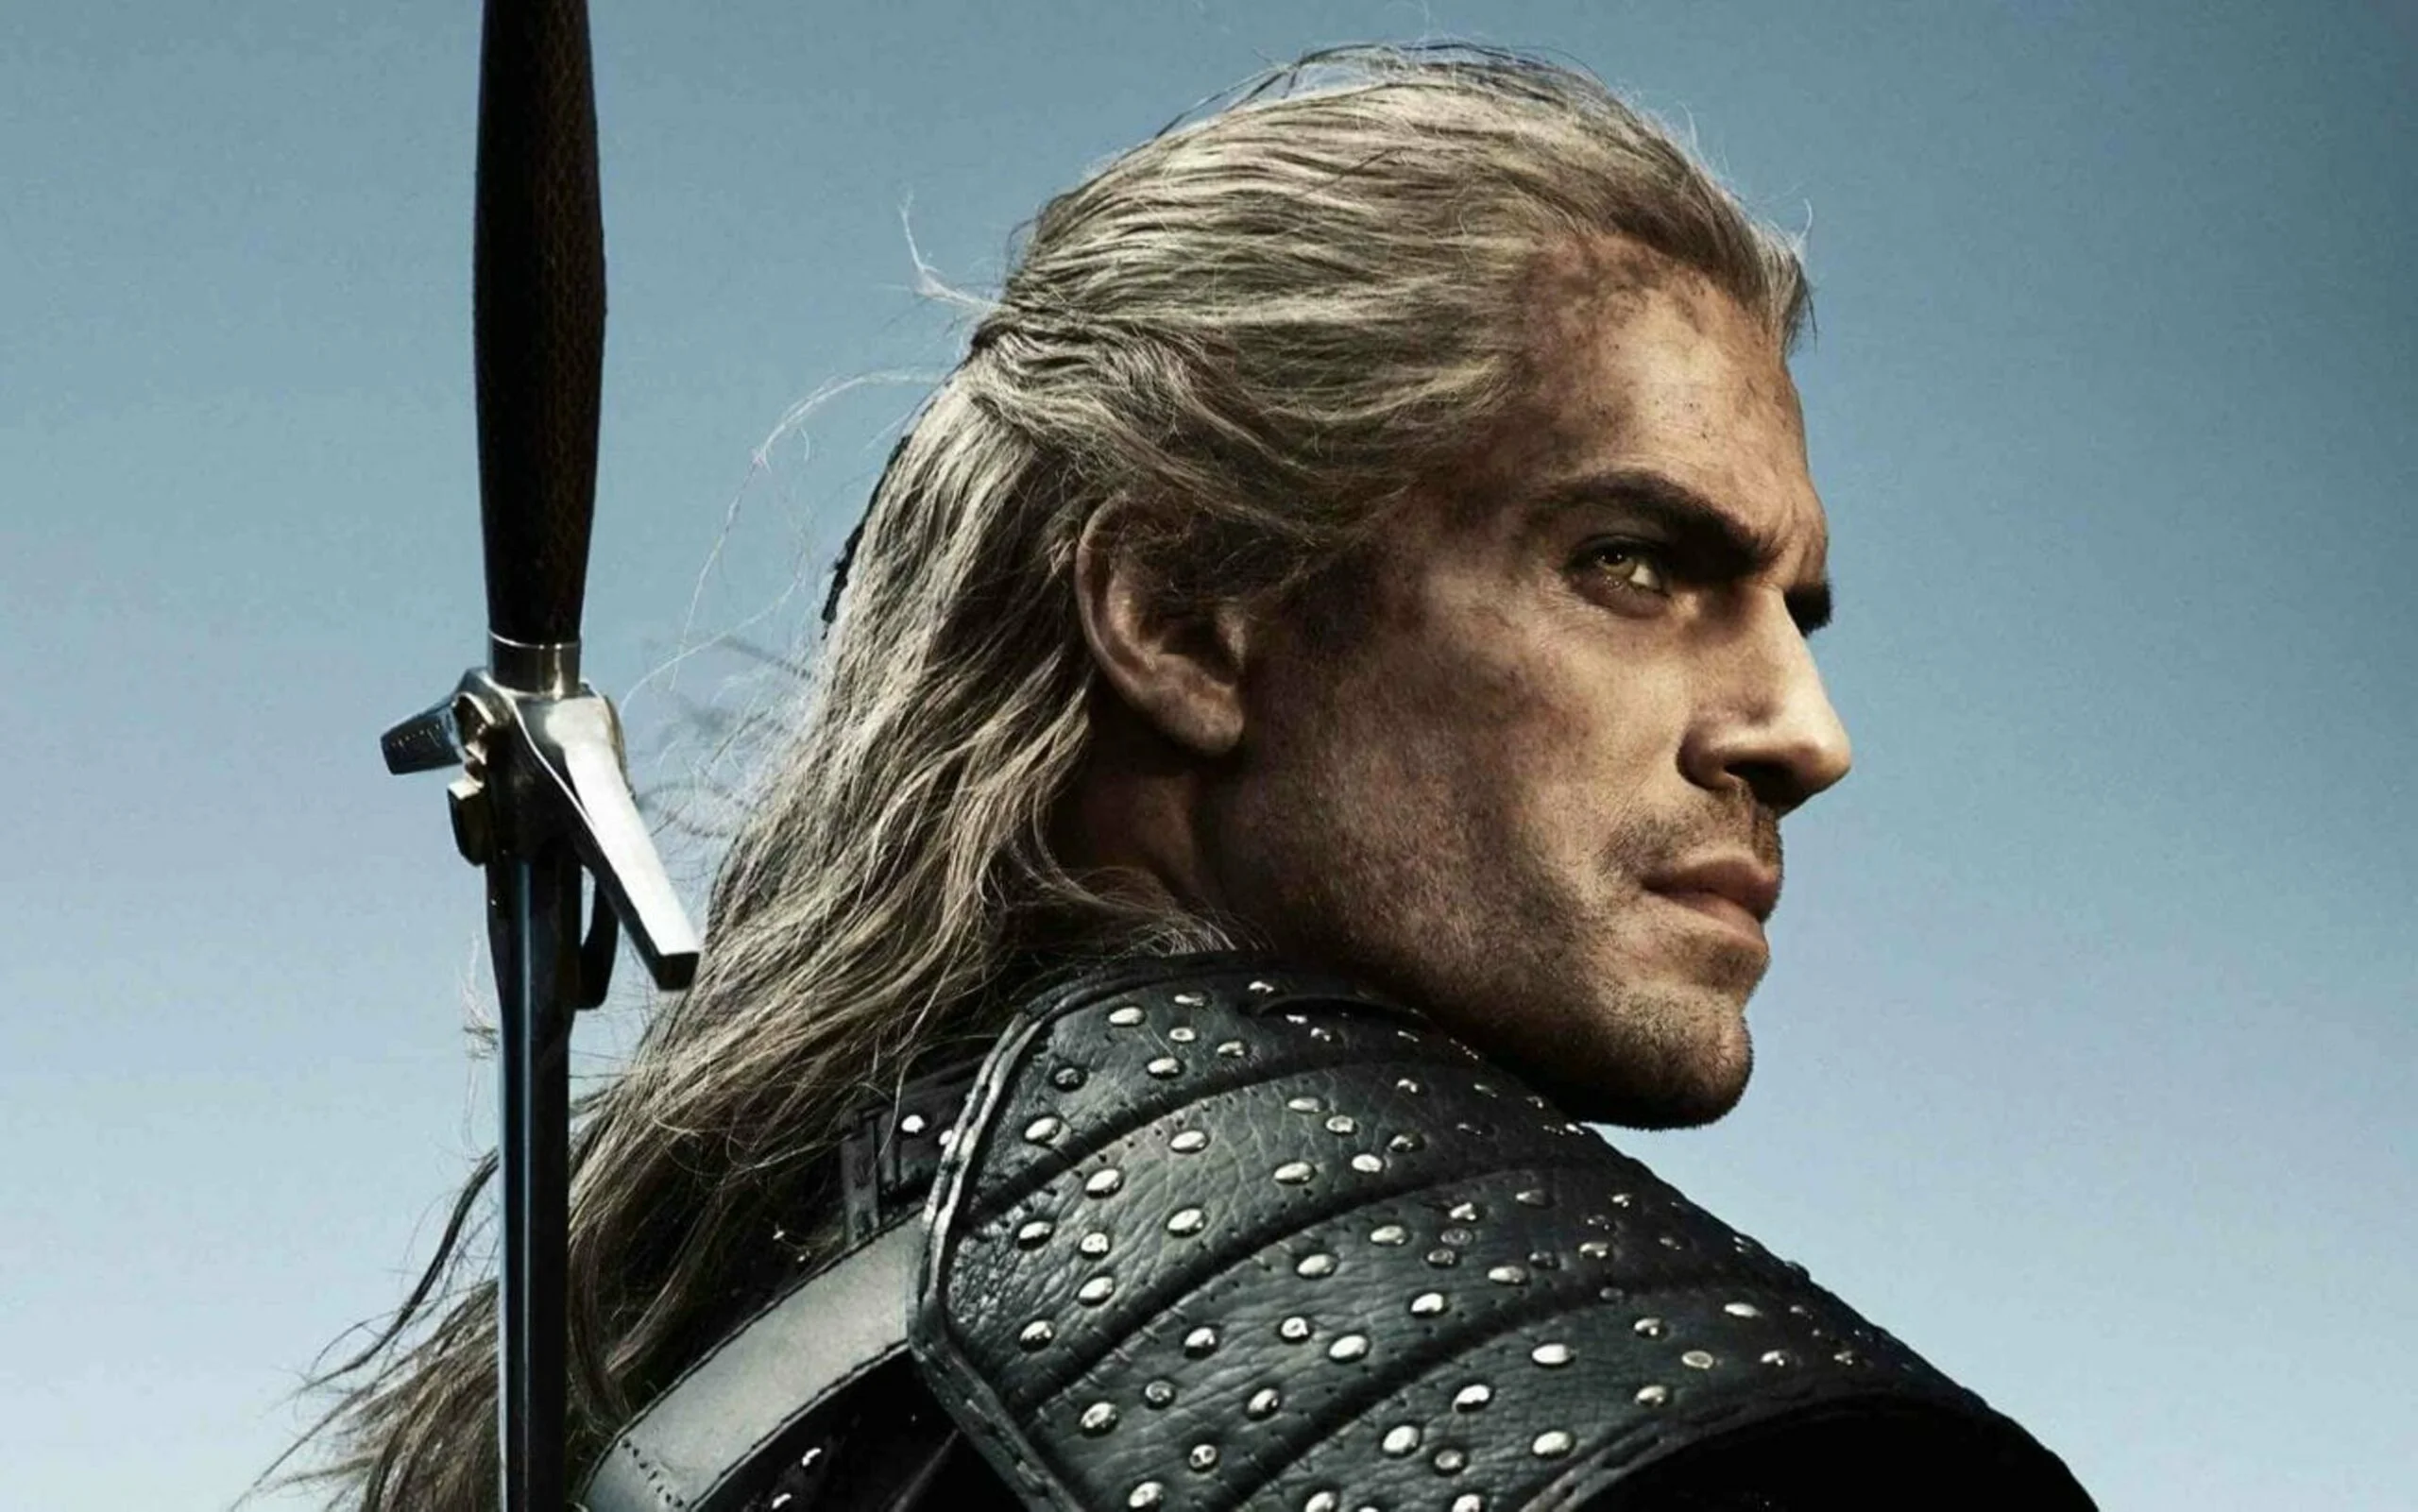 Filming begins on the third season of The Witcher on Netflix